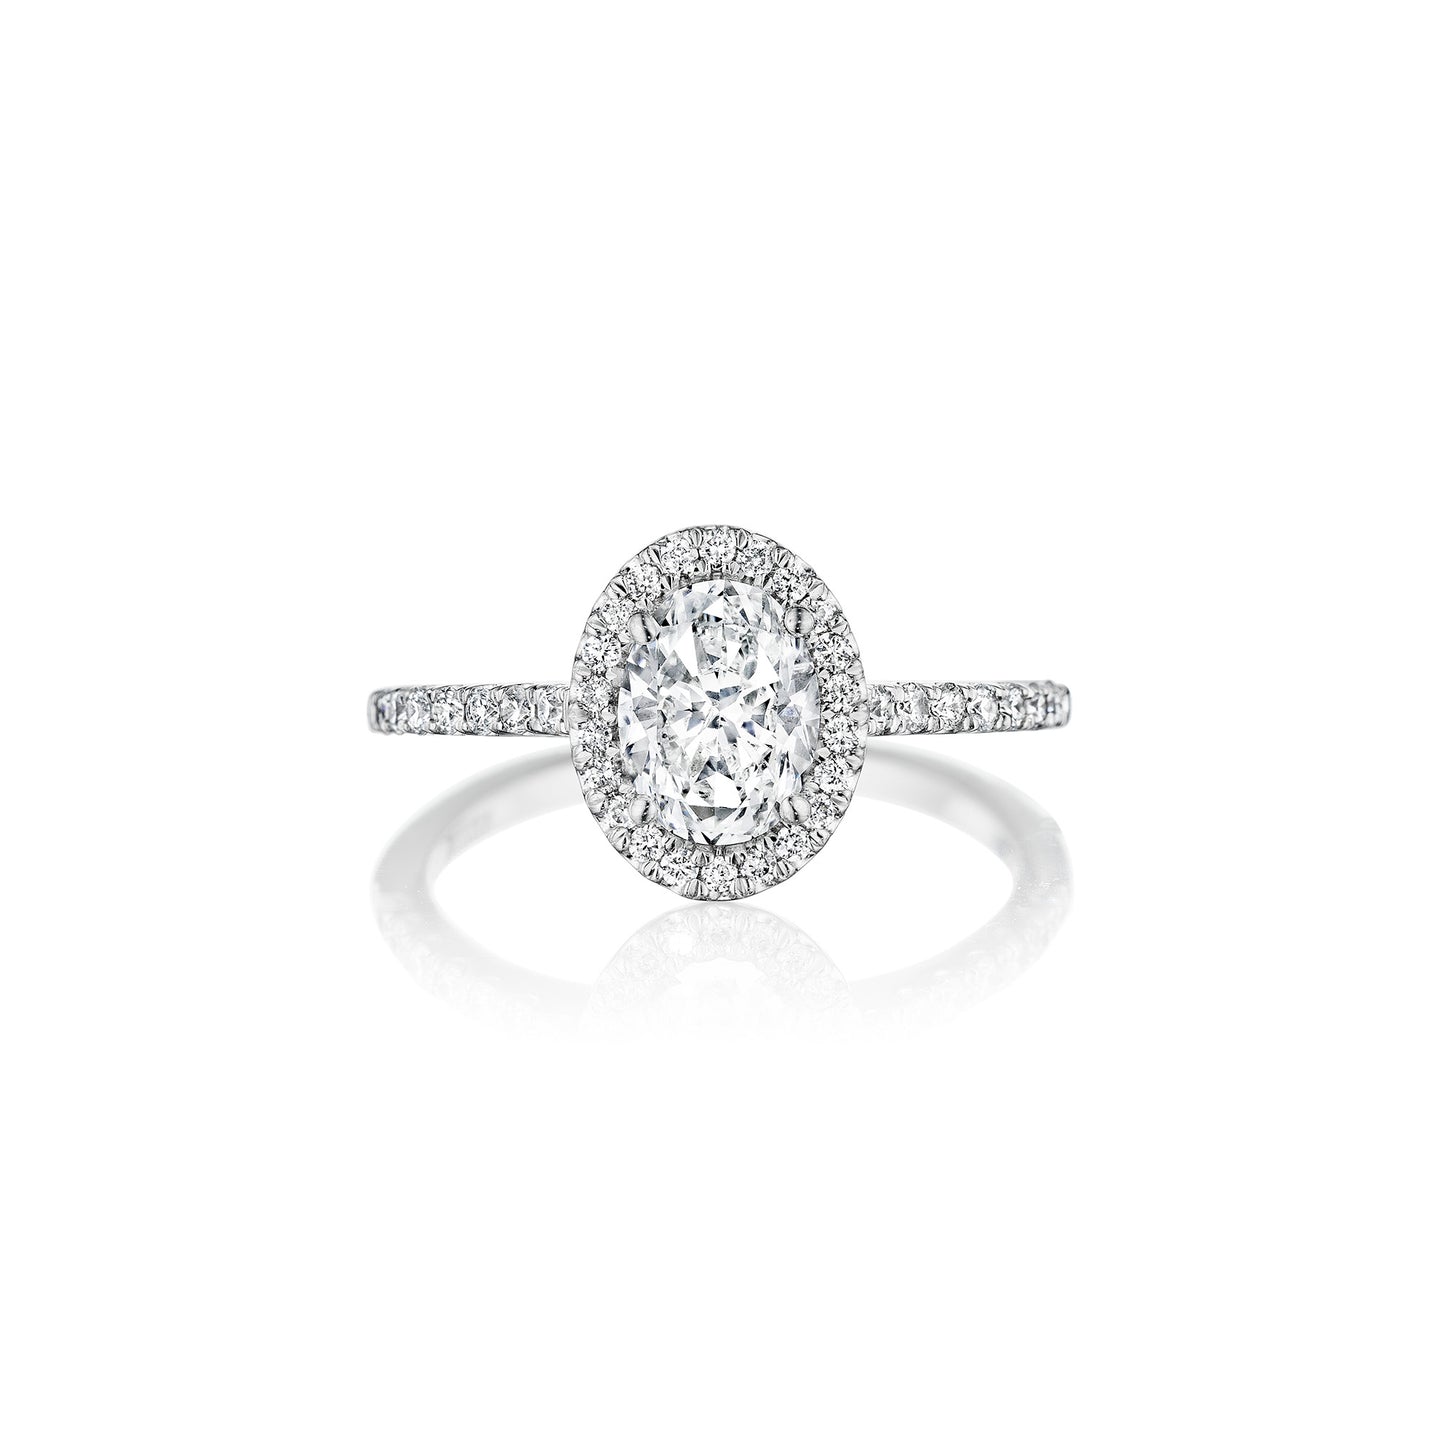 Fink's Exclusive Platinum Oval Diamond Halo Engagement Ring